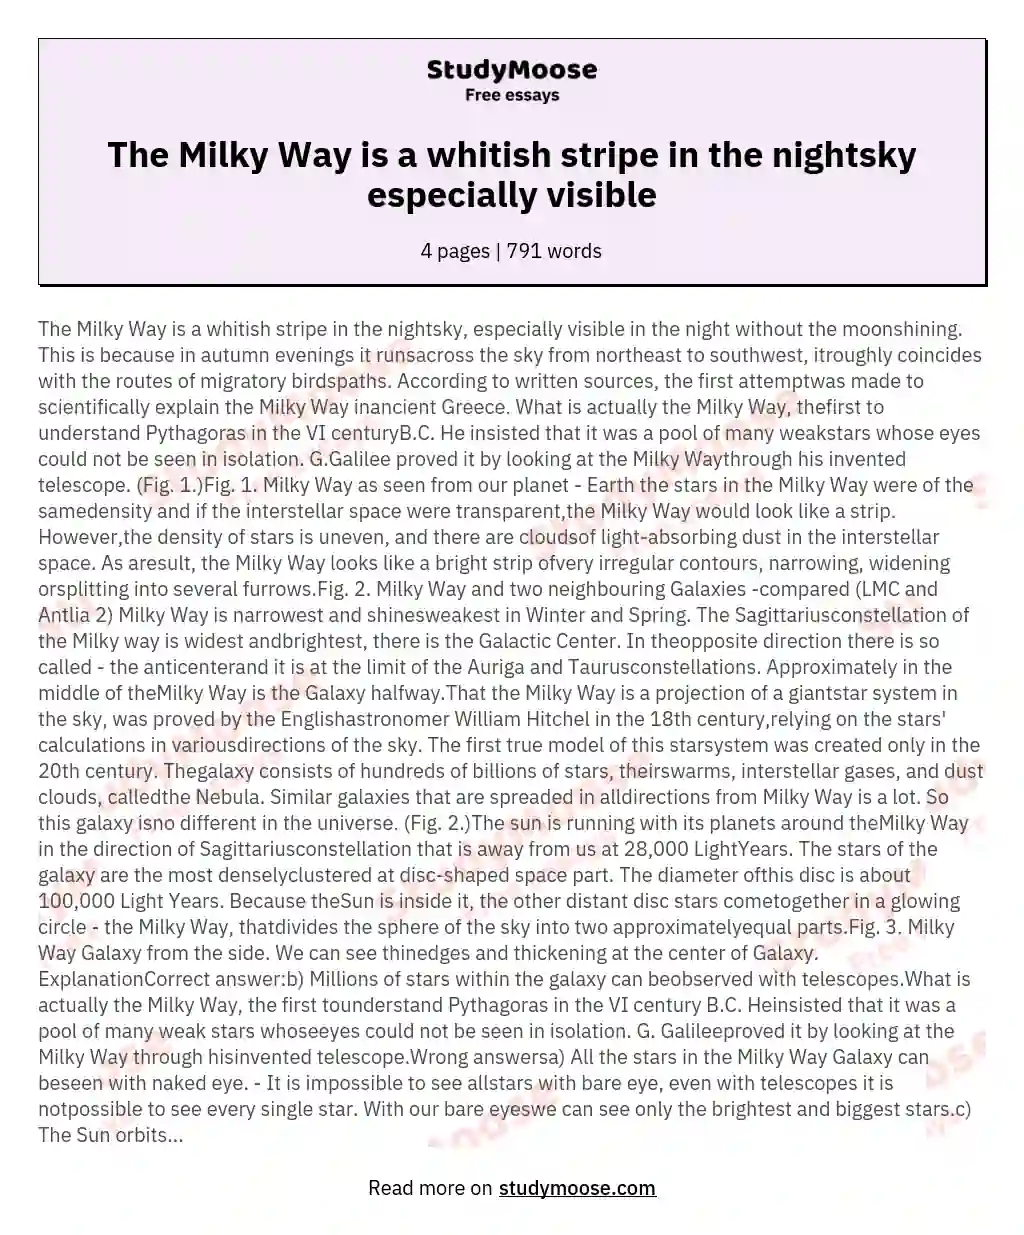 The Milky Way is a whitish stripe in the nightsky especially visible essay